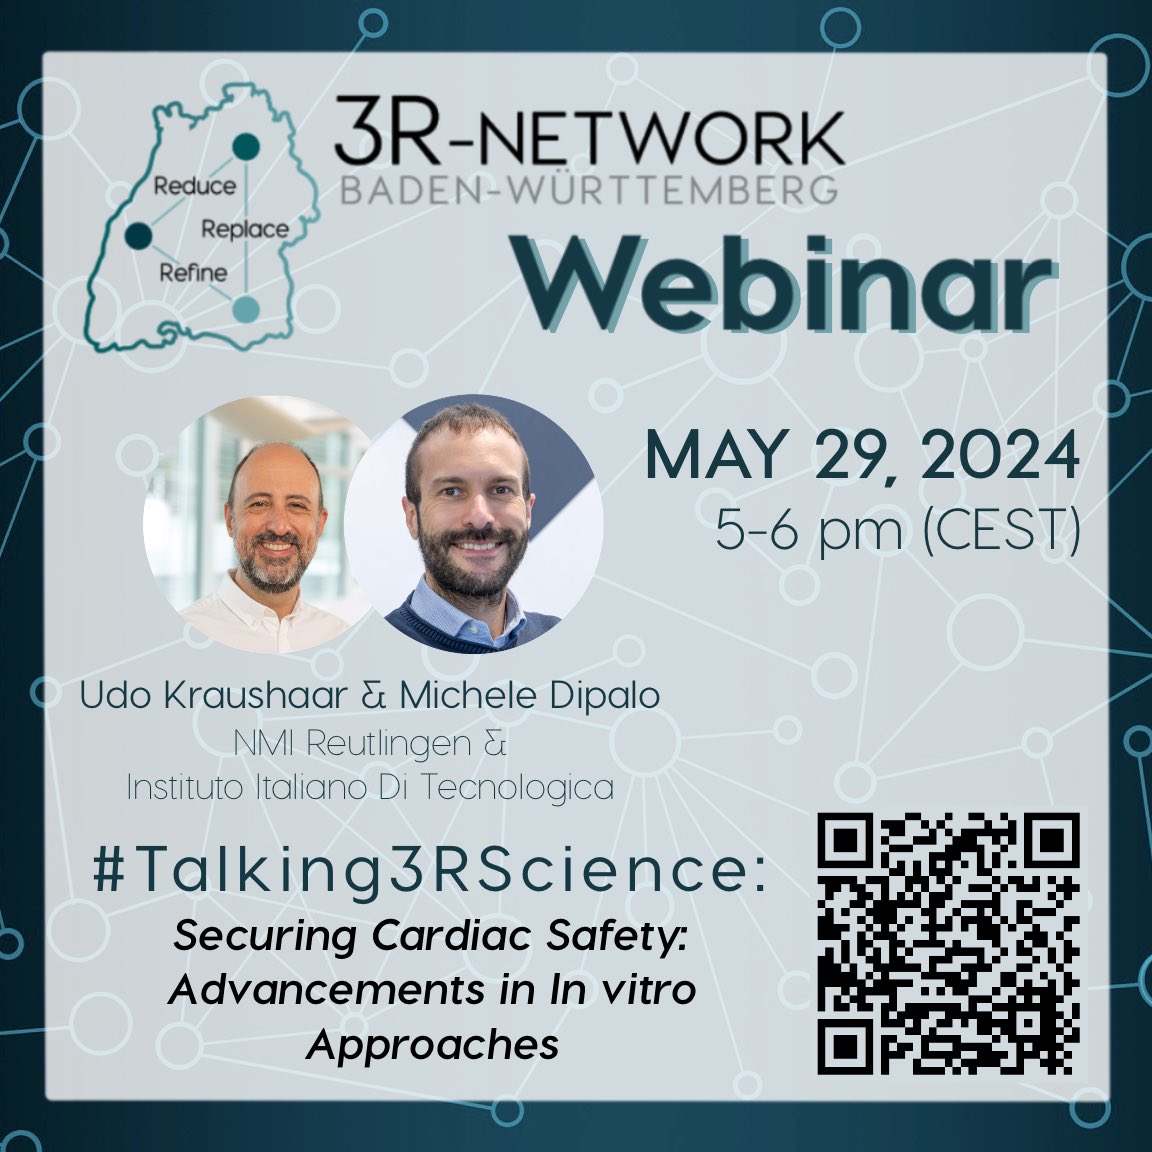 📣 In this month’s #Talking3RScience Webinar (May 29, 5-6pm CEST), we’ll explore #CardiacSafety with a focus on novel #InVitro approaches & #MicroelectrodeArray #MEA integration with Udo Kraushaar @NMI_DE & @DipaloMichele @IITalk! 🫀🔬Register for free at: lnkd.in/e5atMsEn